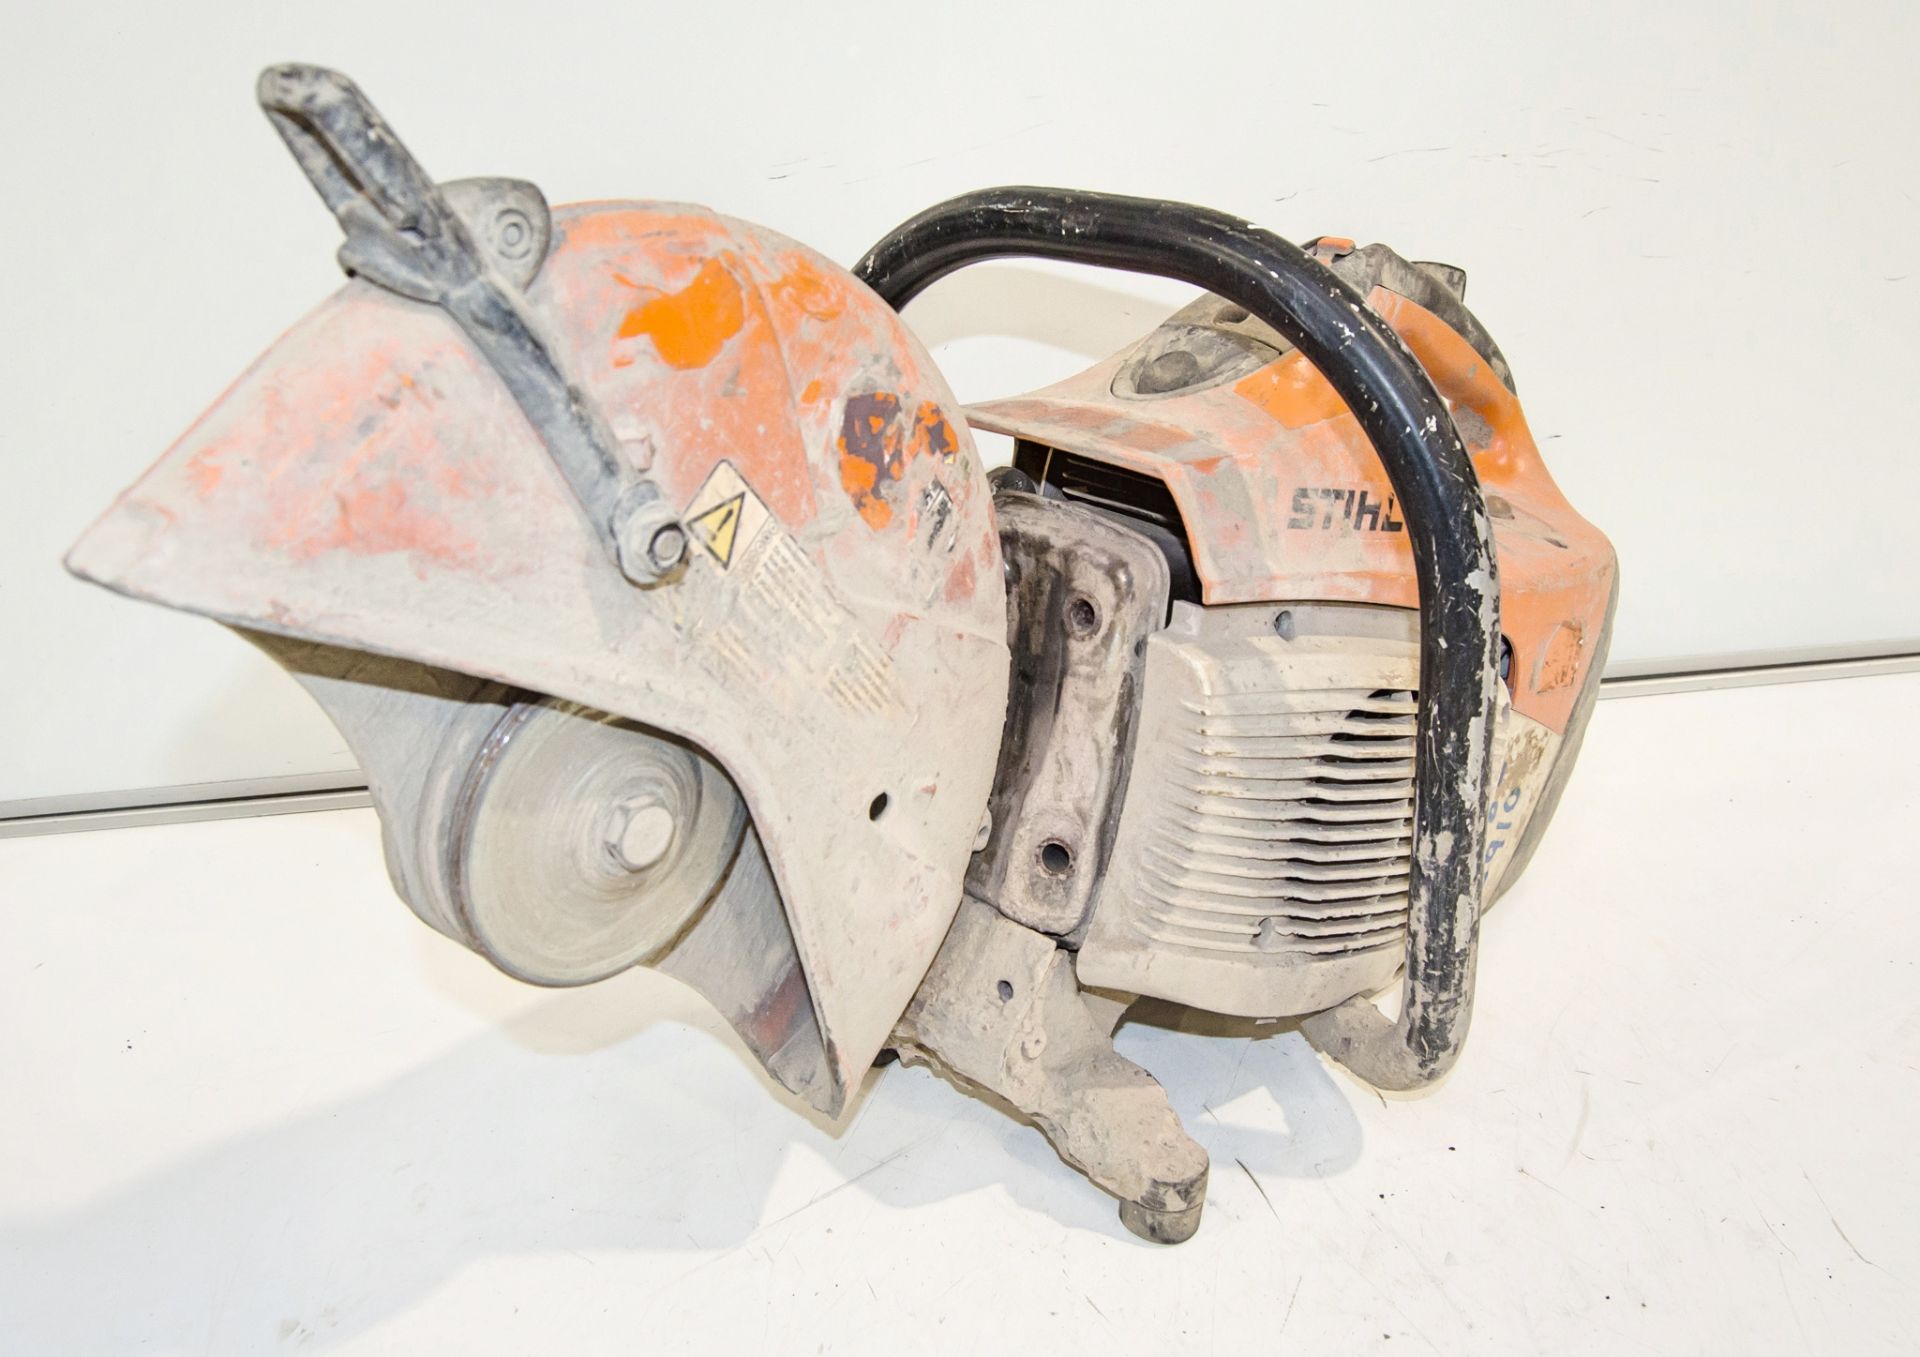 Stihl TS410 petrol driven cut off saw ** Pull cord assembly and side cover missing ** 17080910